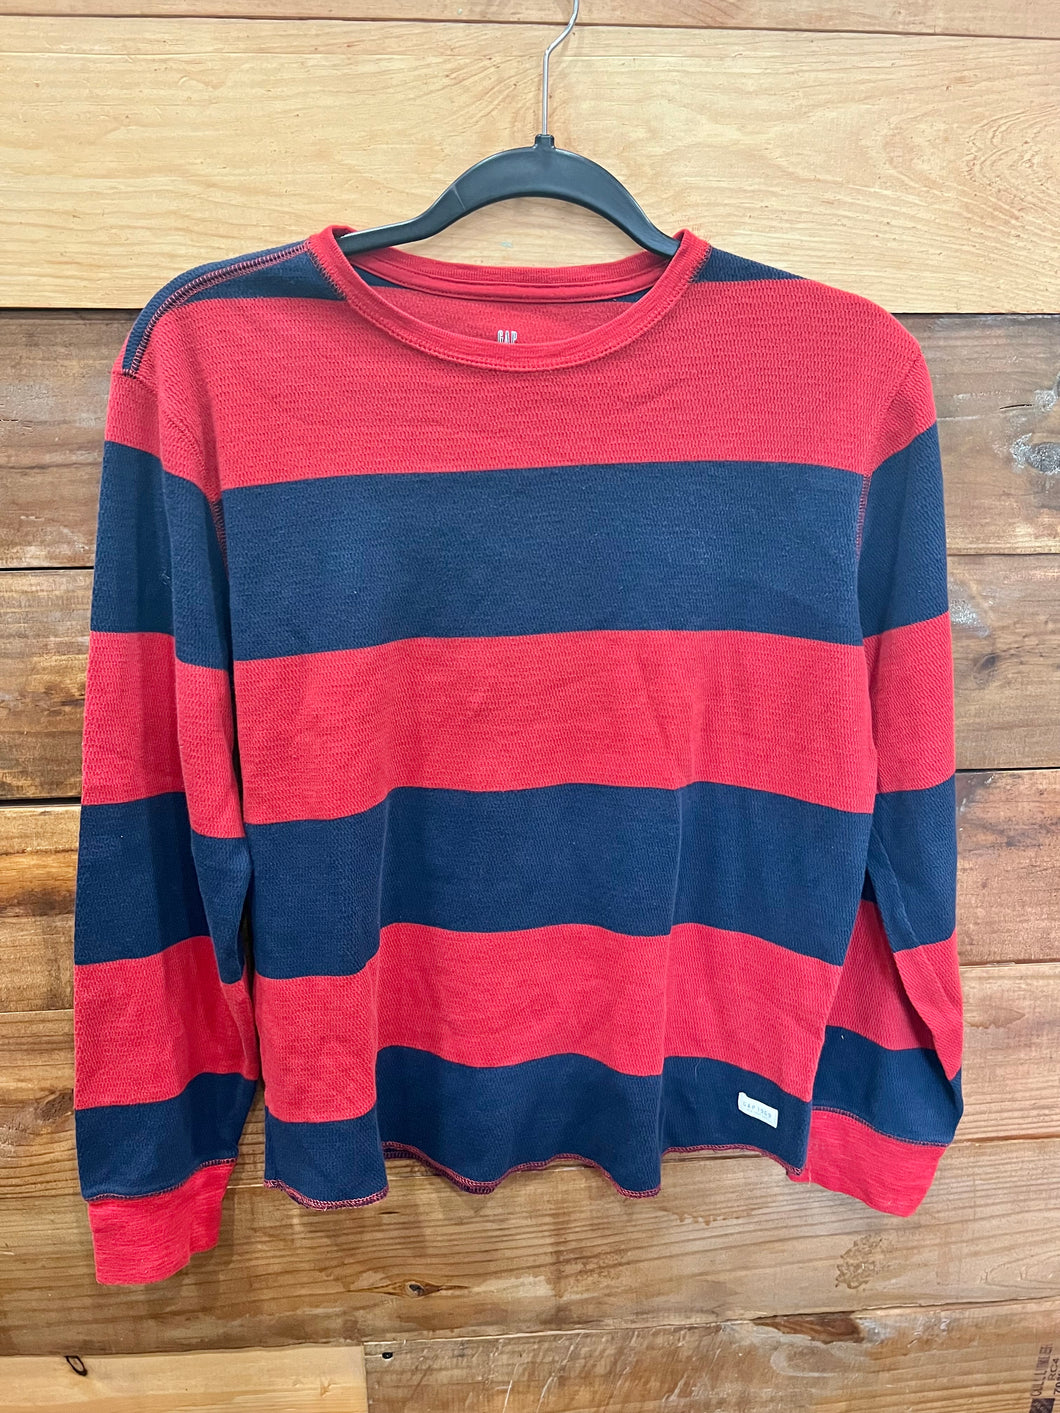 Gap Red Striped Shirt Size 14-16